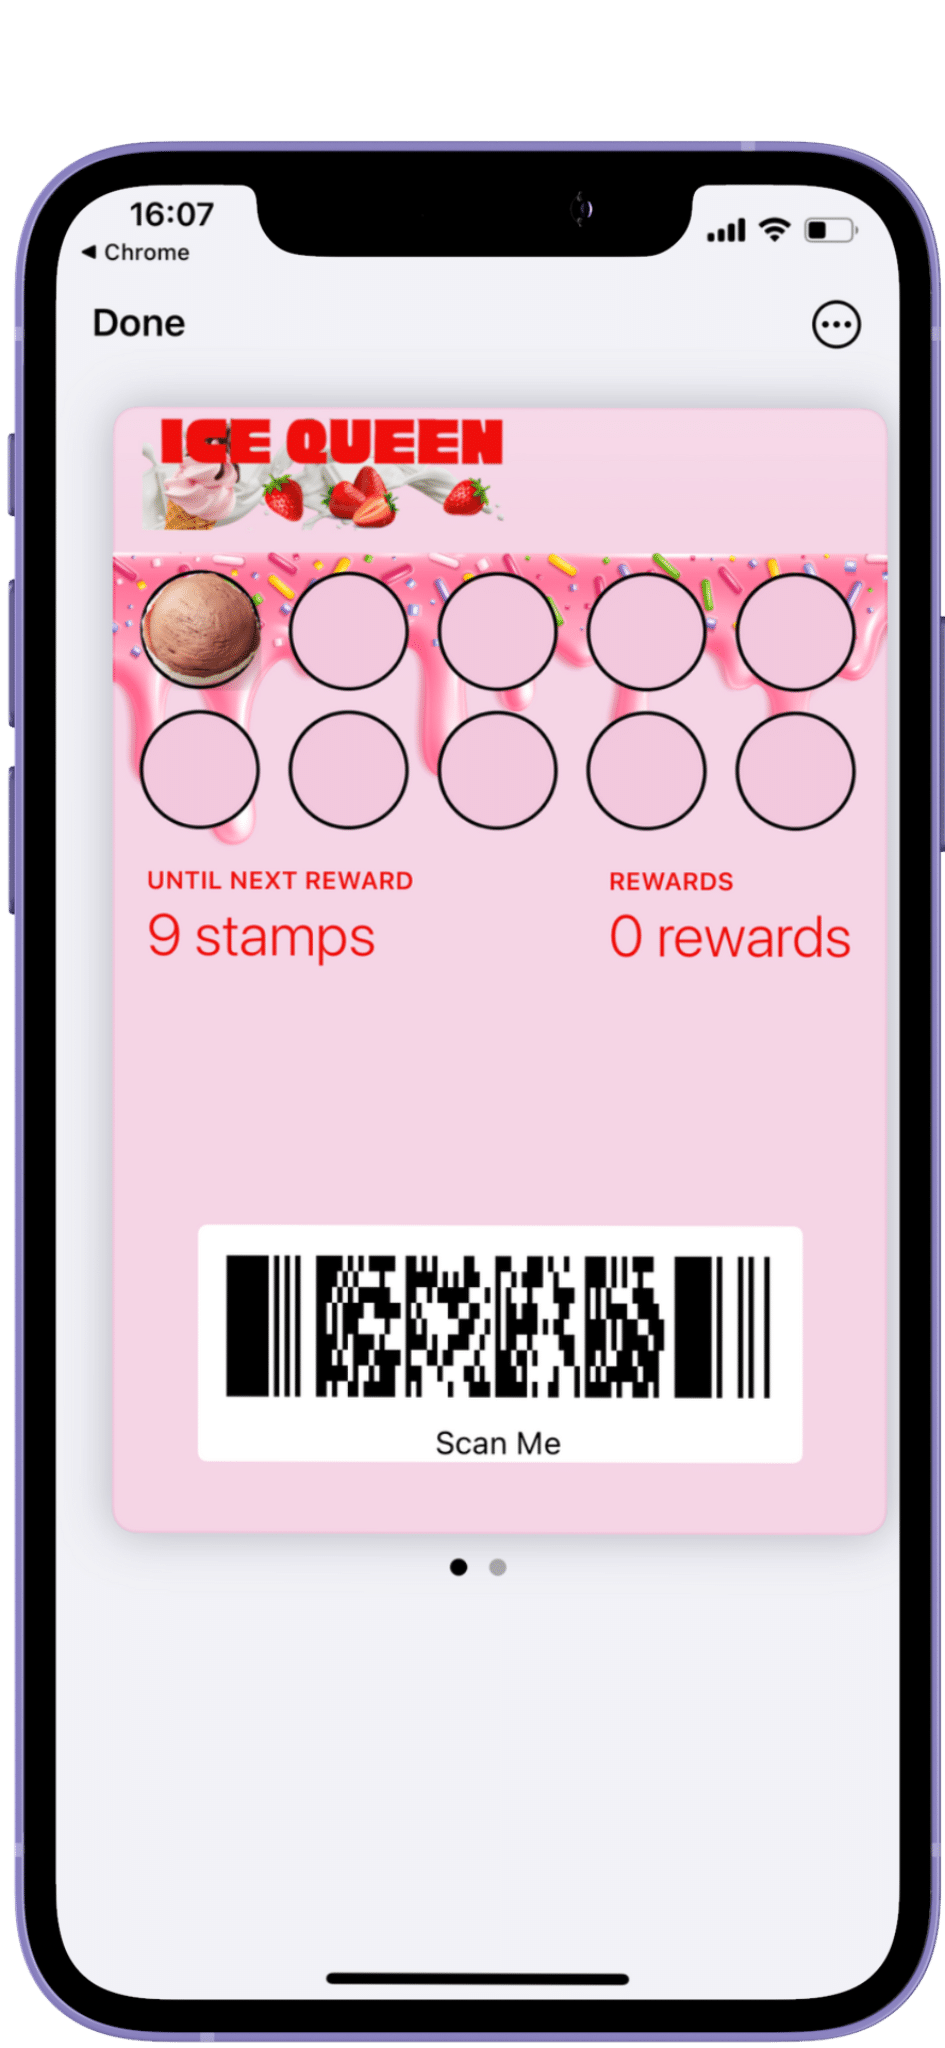 A digital loyalty card on a smartphone app displaying nine stamp slots for "ice queen," with one stamp filled and a barcode for scanning.